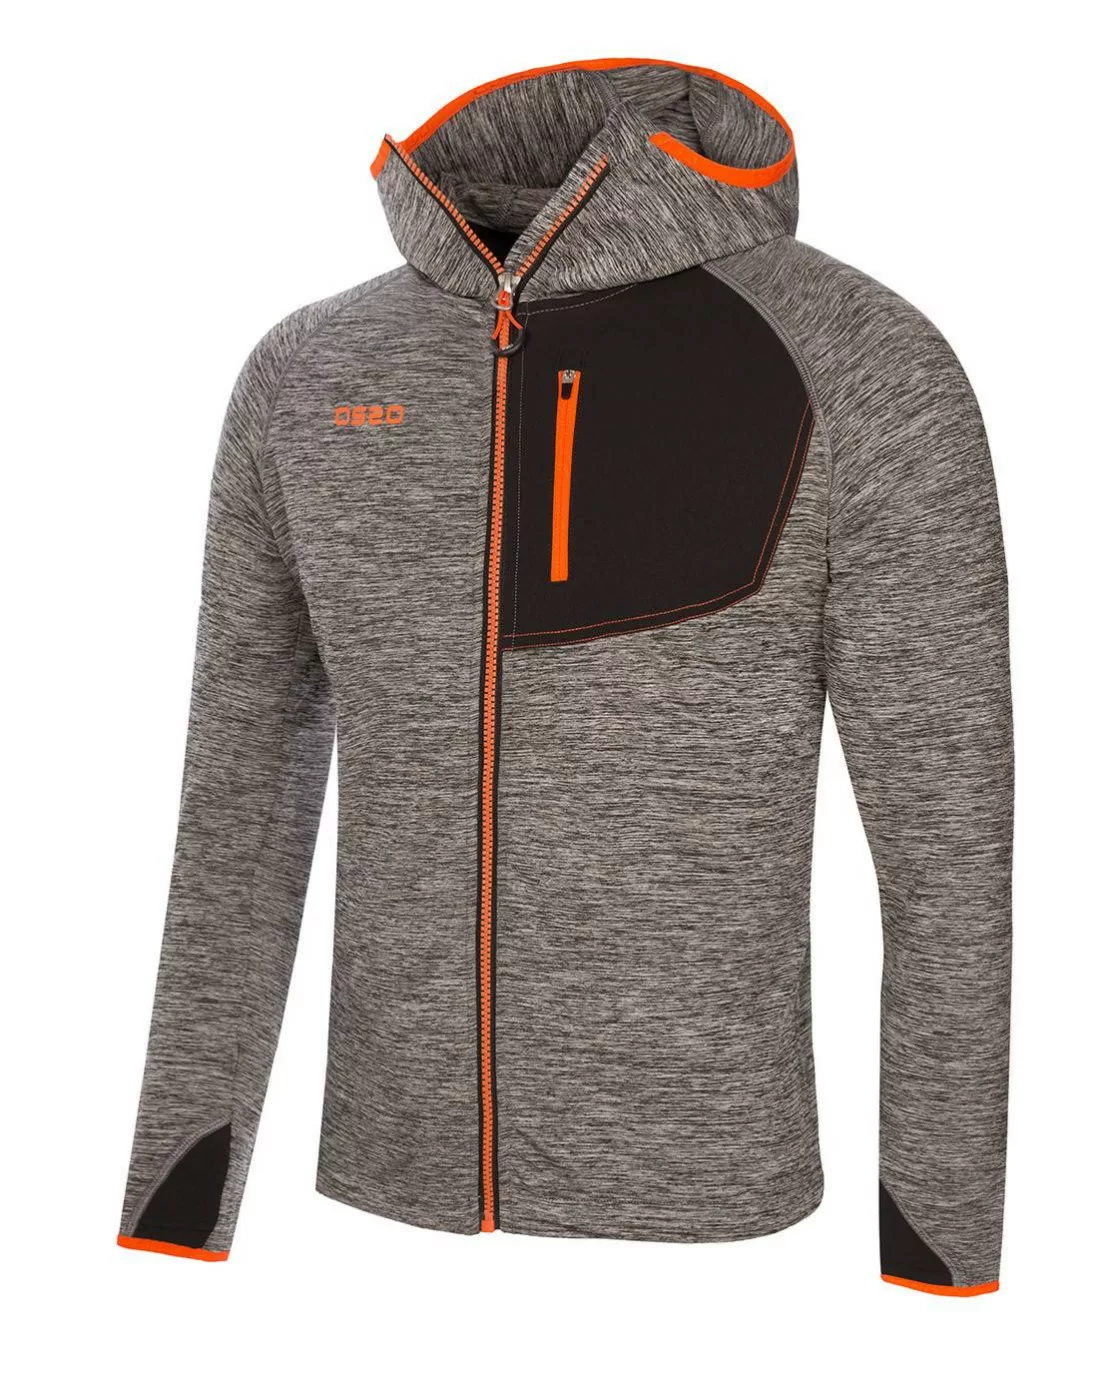 Ace Jacket Gris Frontal